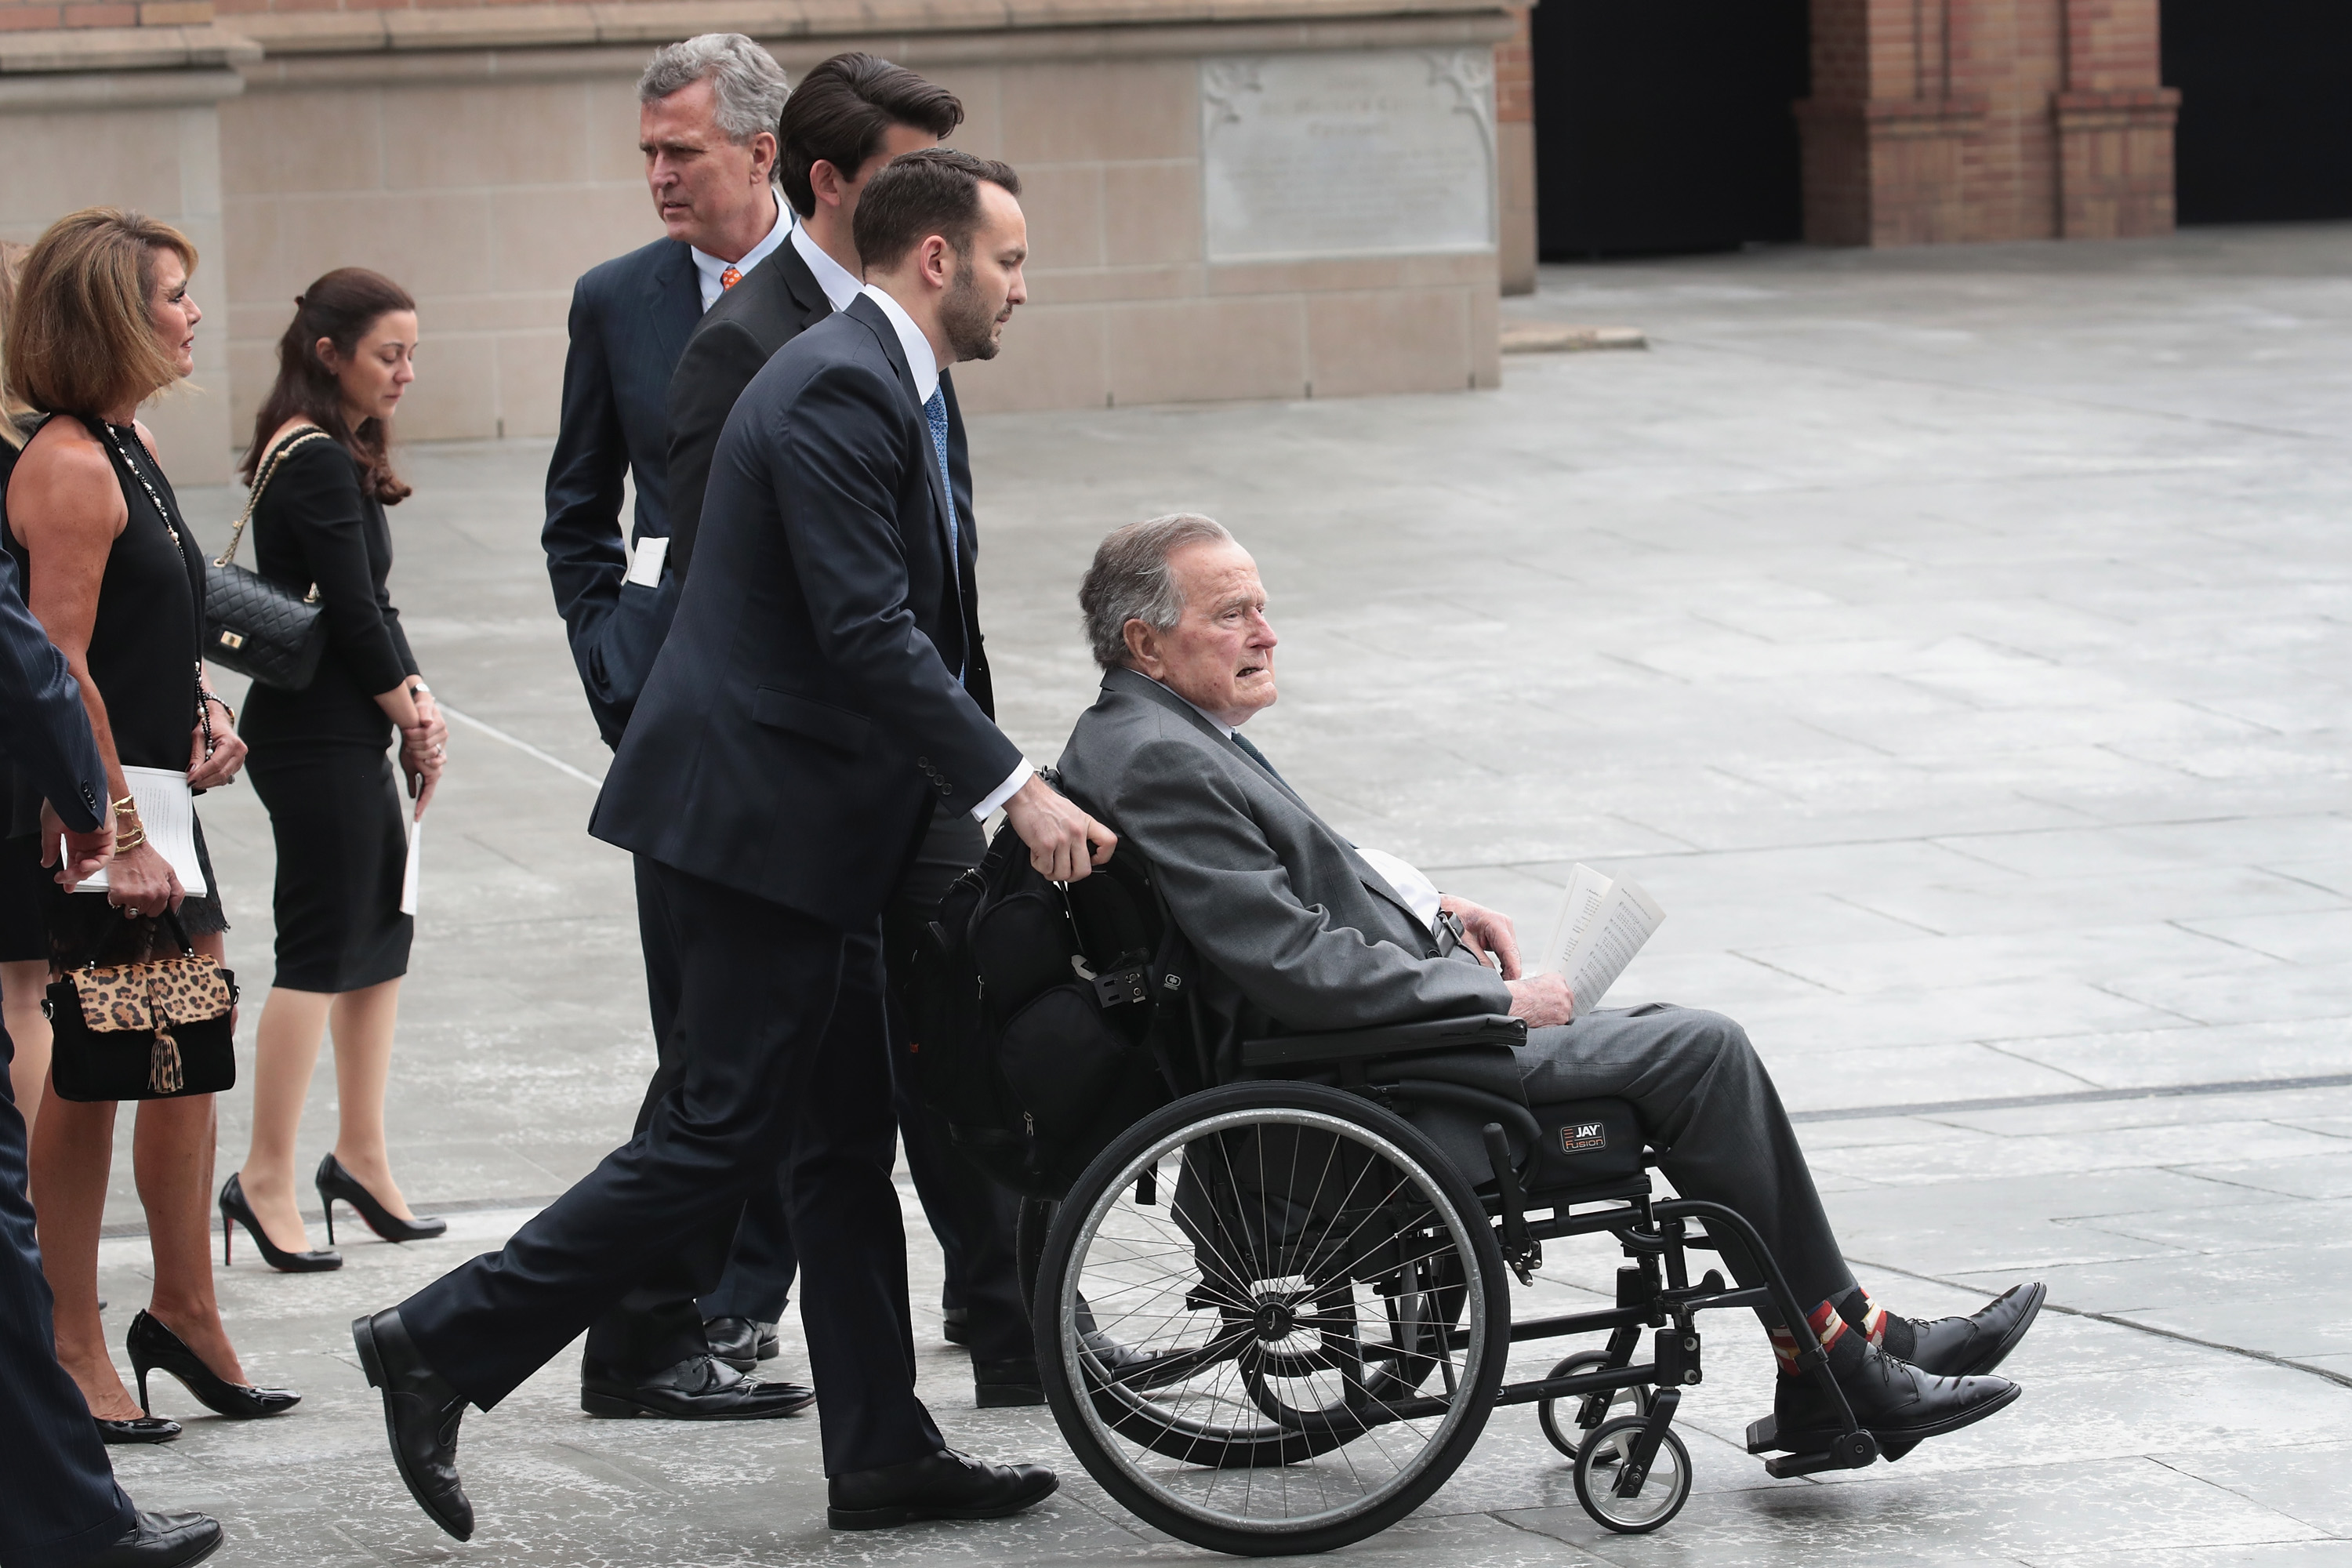 Former president George H.W. Bush leaves the funeral service of former first lady Barbara Bush at St. Martin's Episcopal Church on April 21, 2018 in Houston, Texas. (Scott Olson—Getty Images)